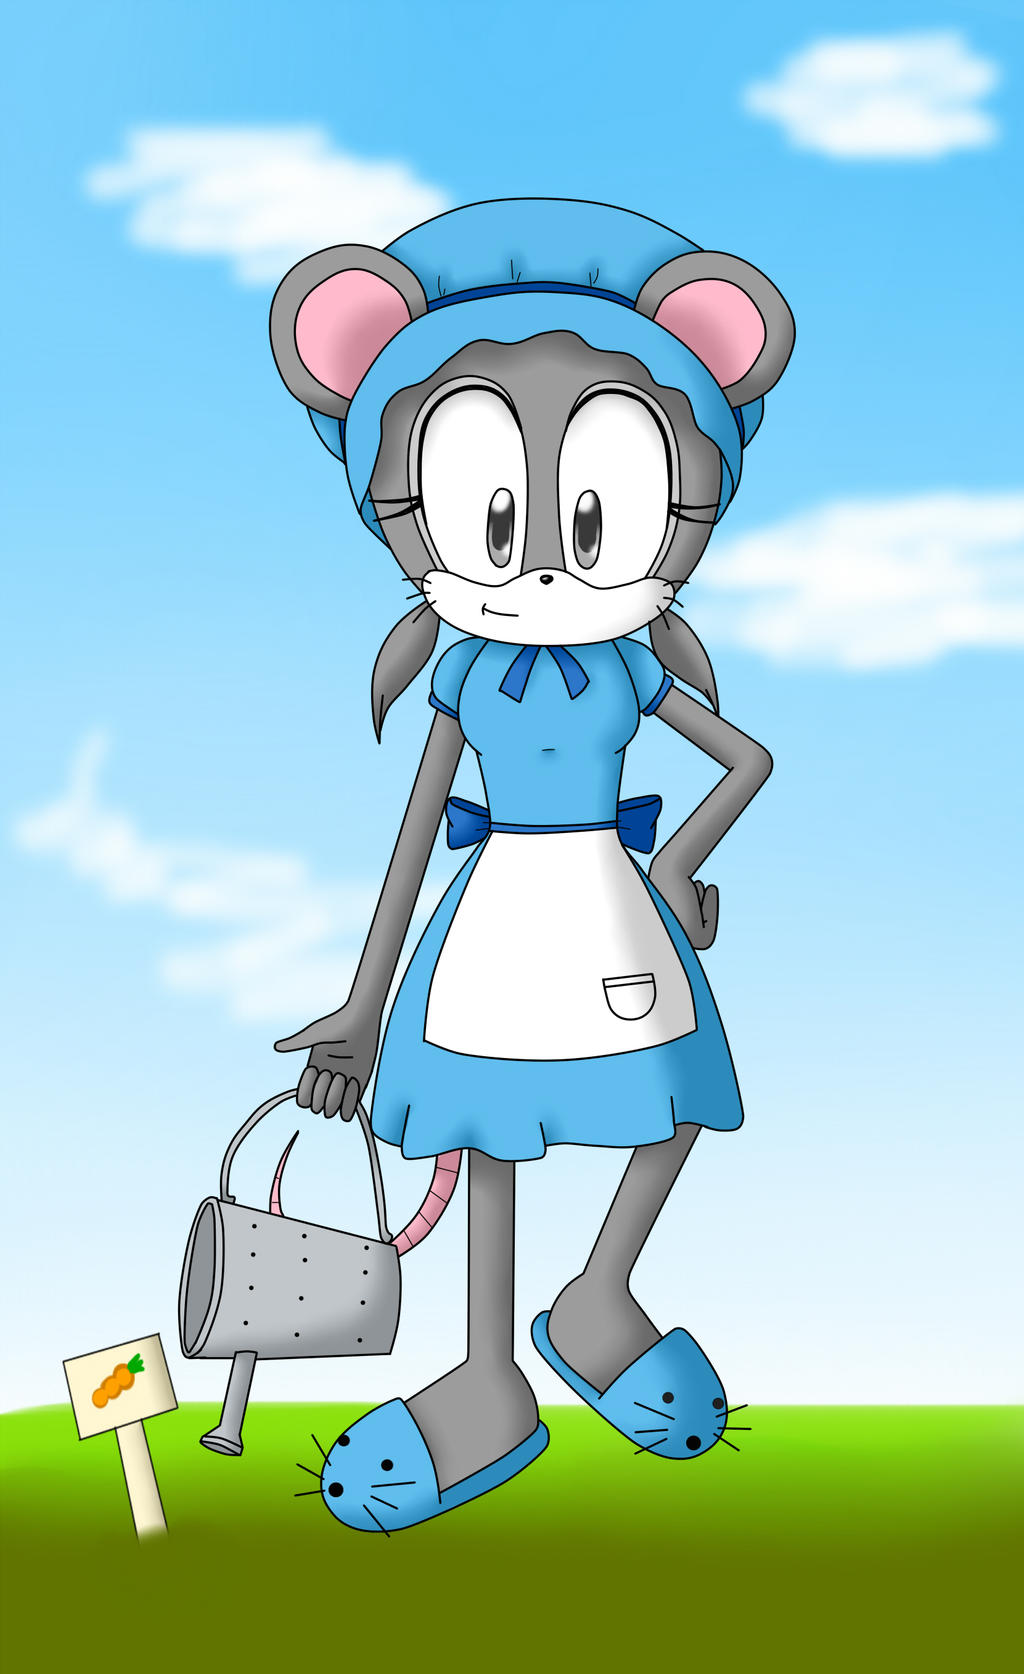 Matilda the mouse by animecat33 on deviantART